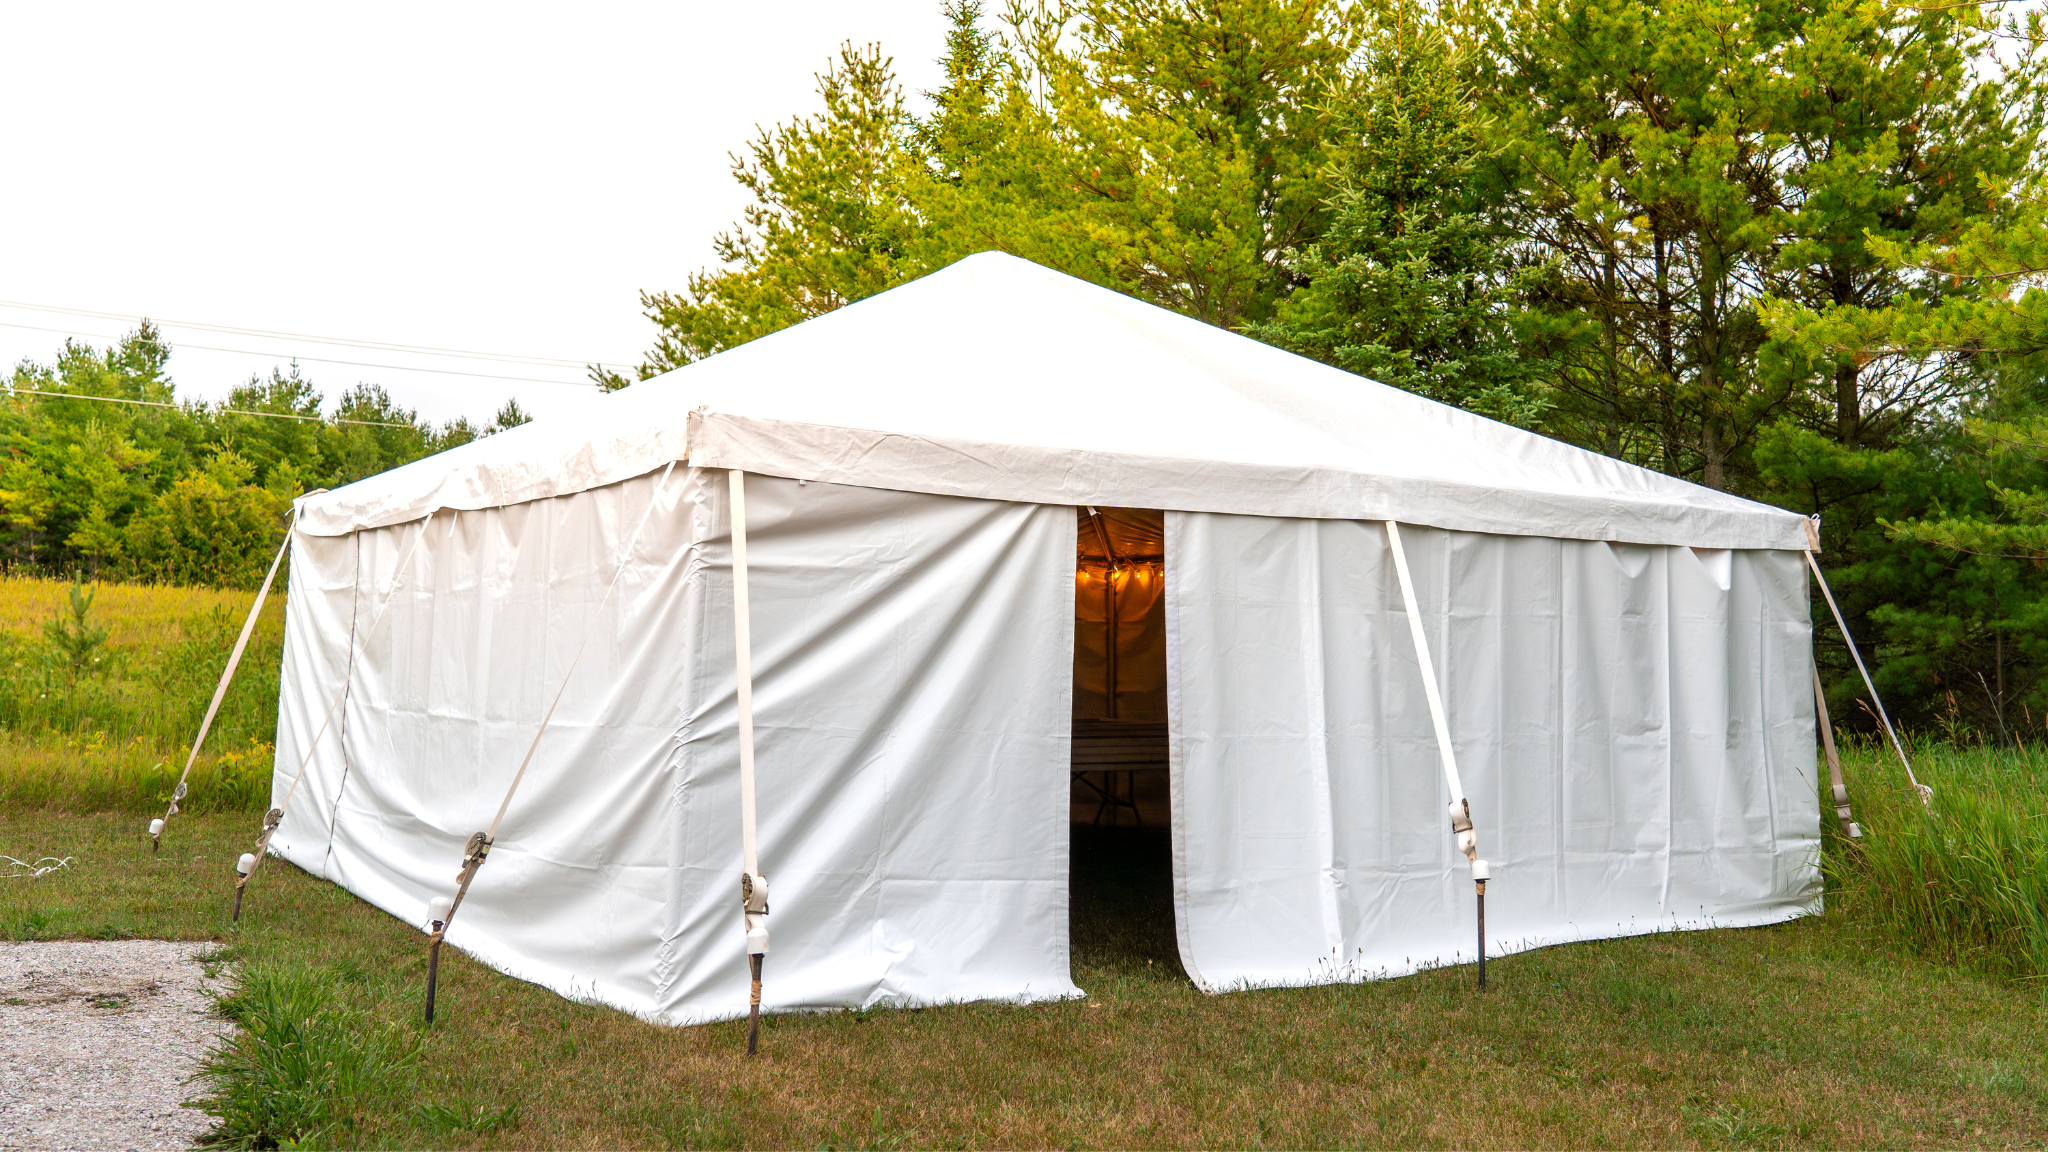 Commercial 20 x 20 Frame Tents for Sale